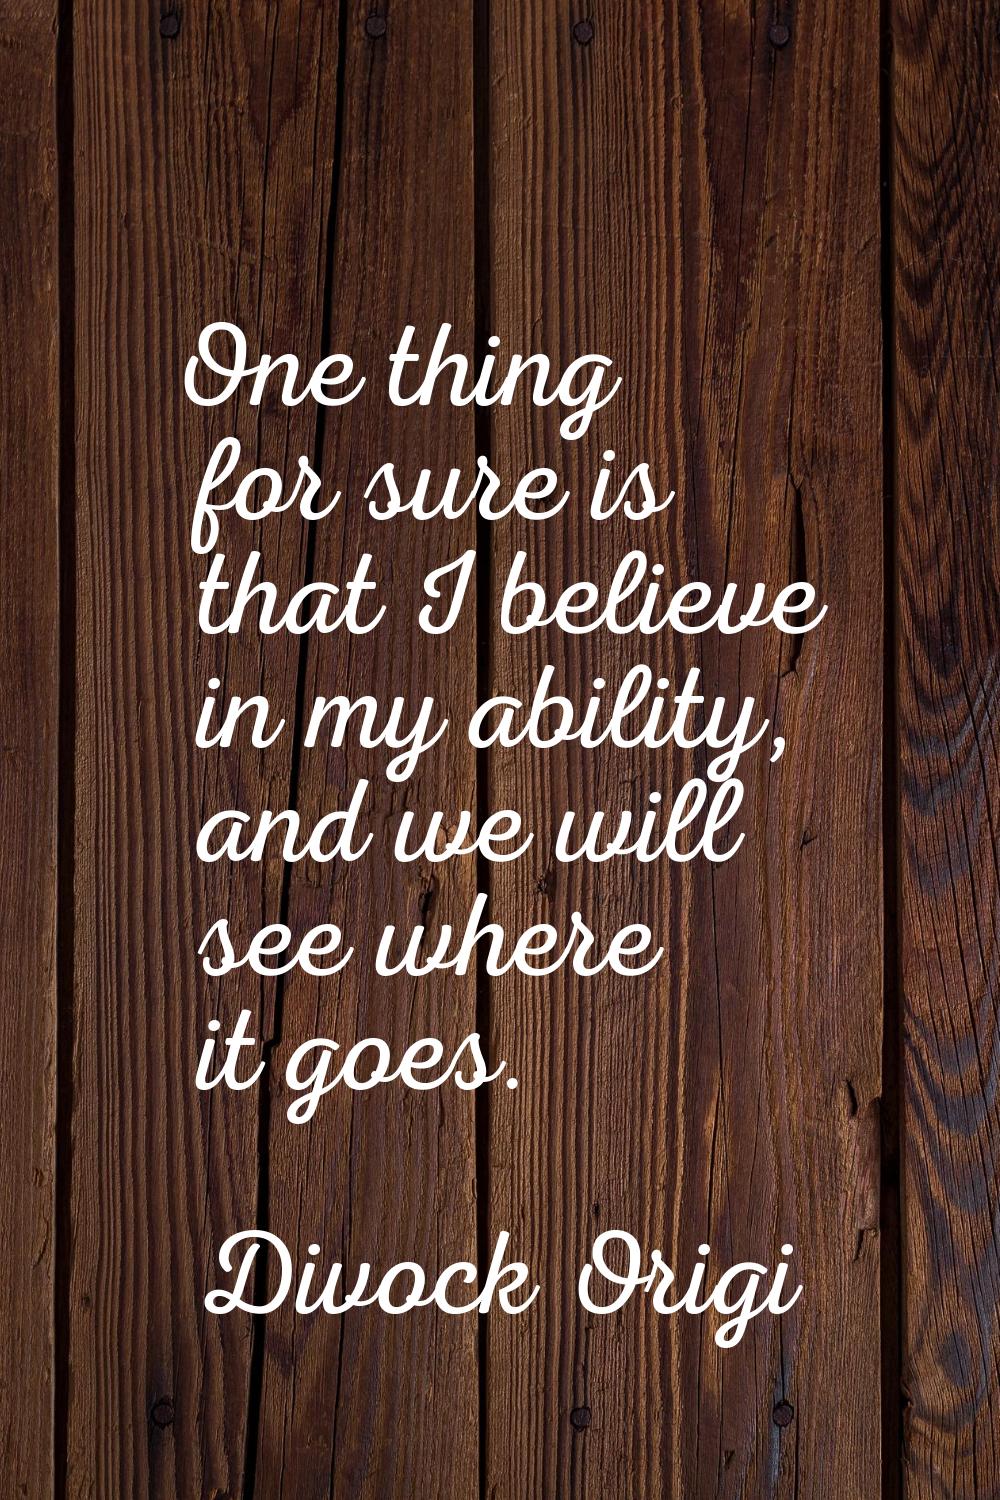 One thing for sure is that I believe in my ability, and we will see where it goes.